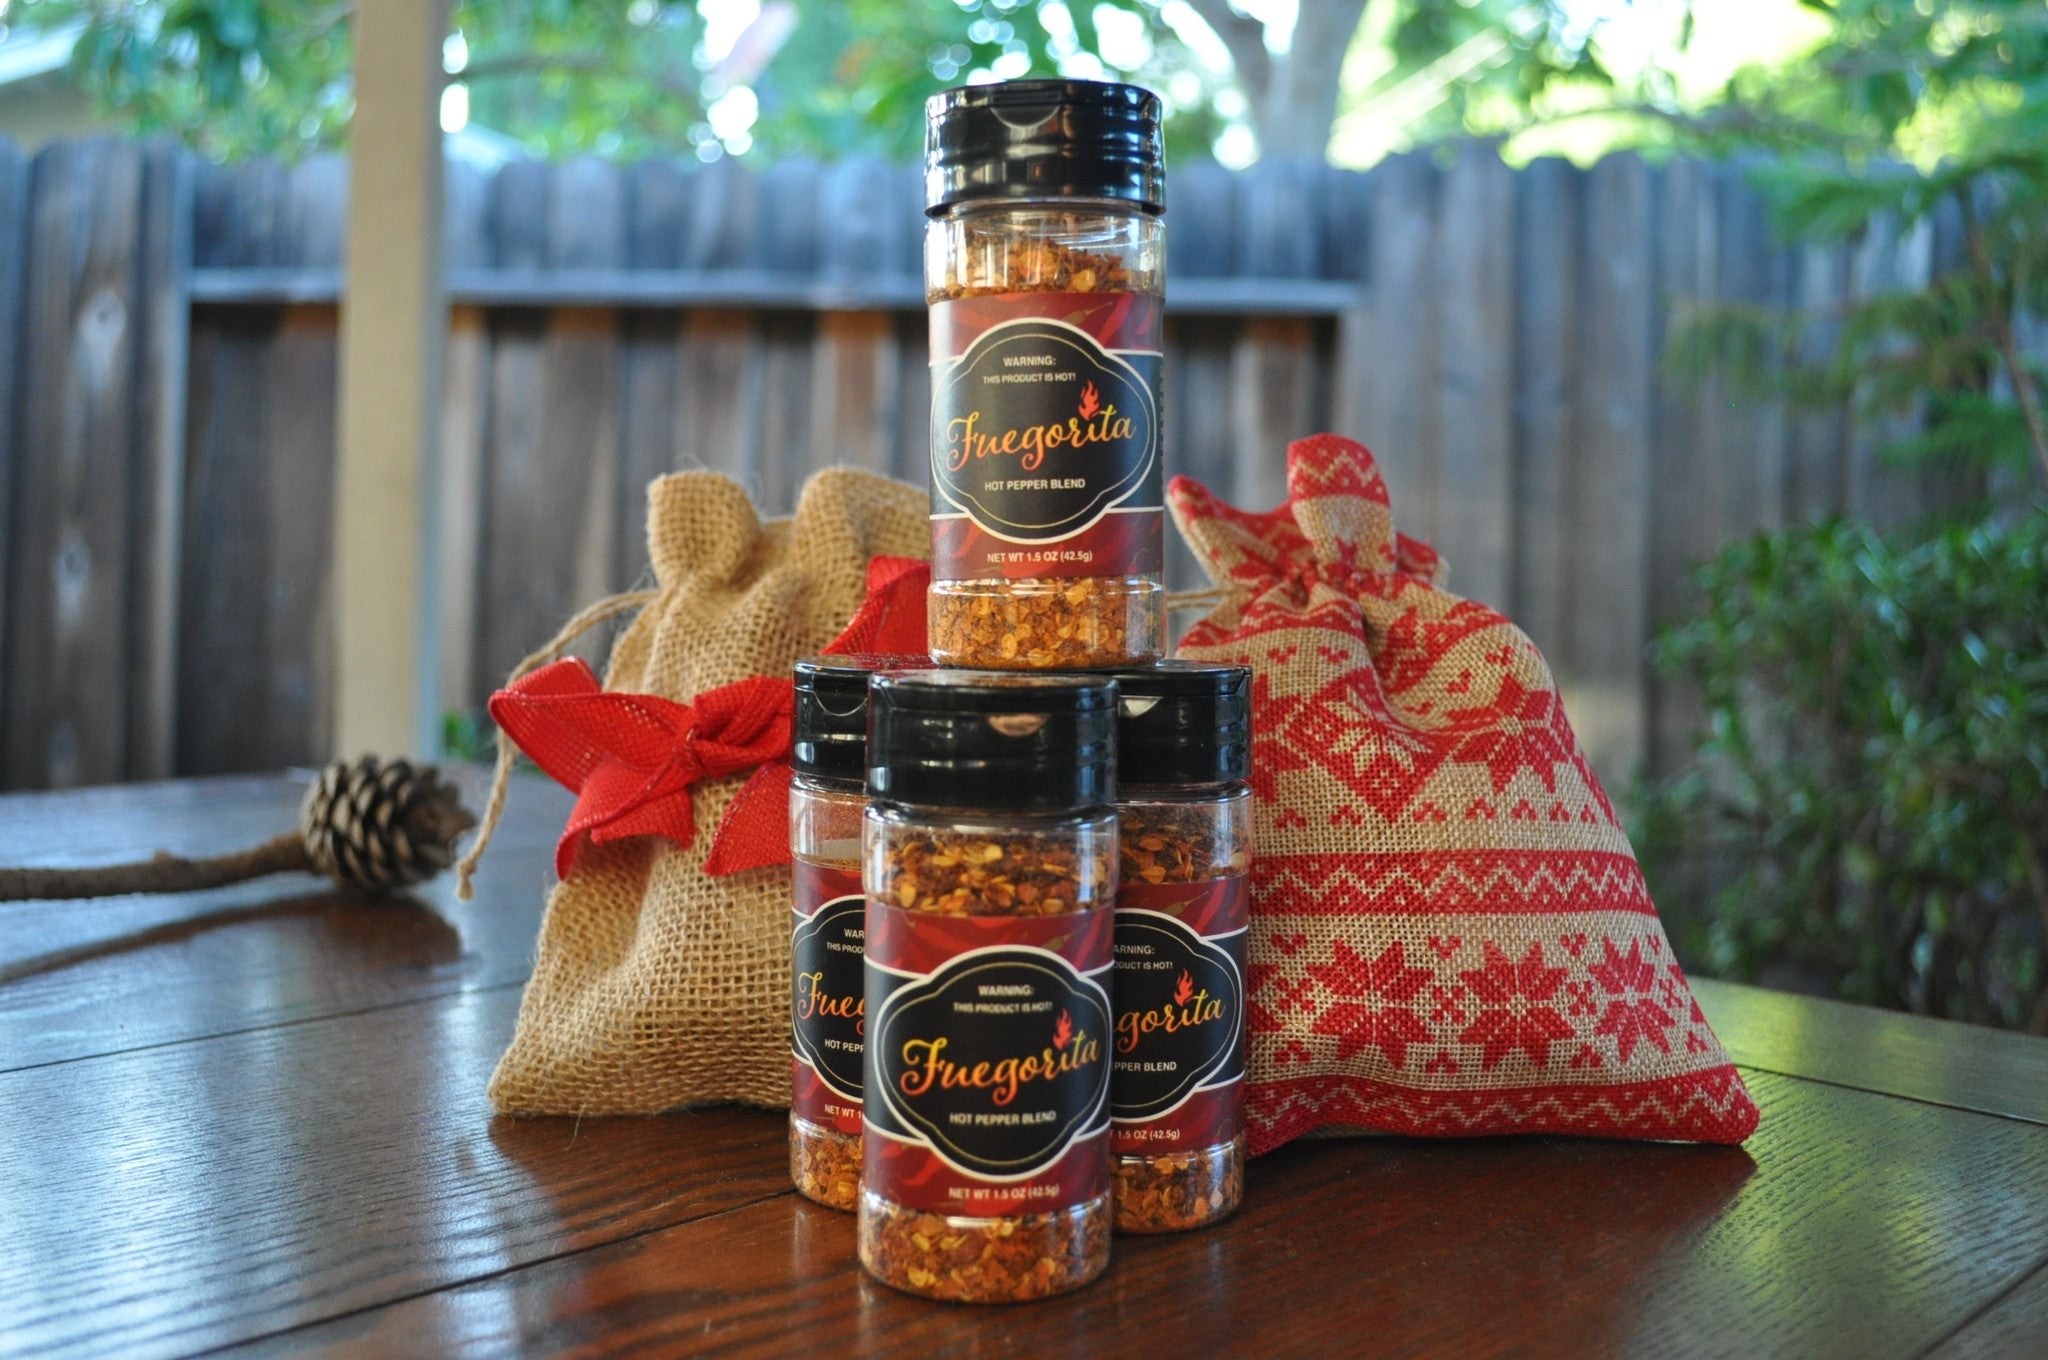 Heat up the holidays with these spicy gift ideas!